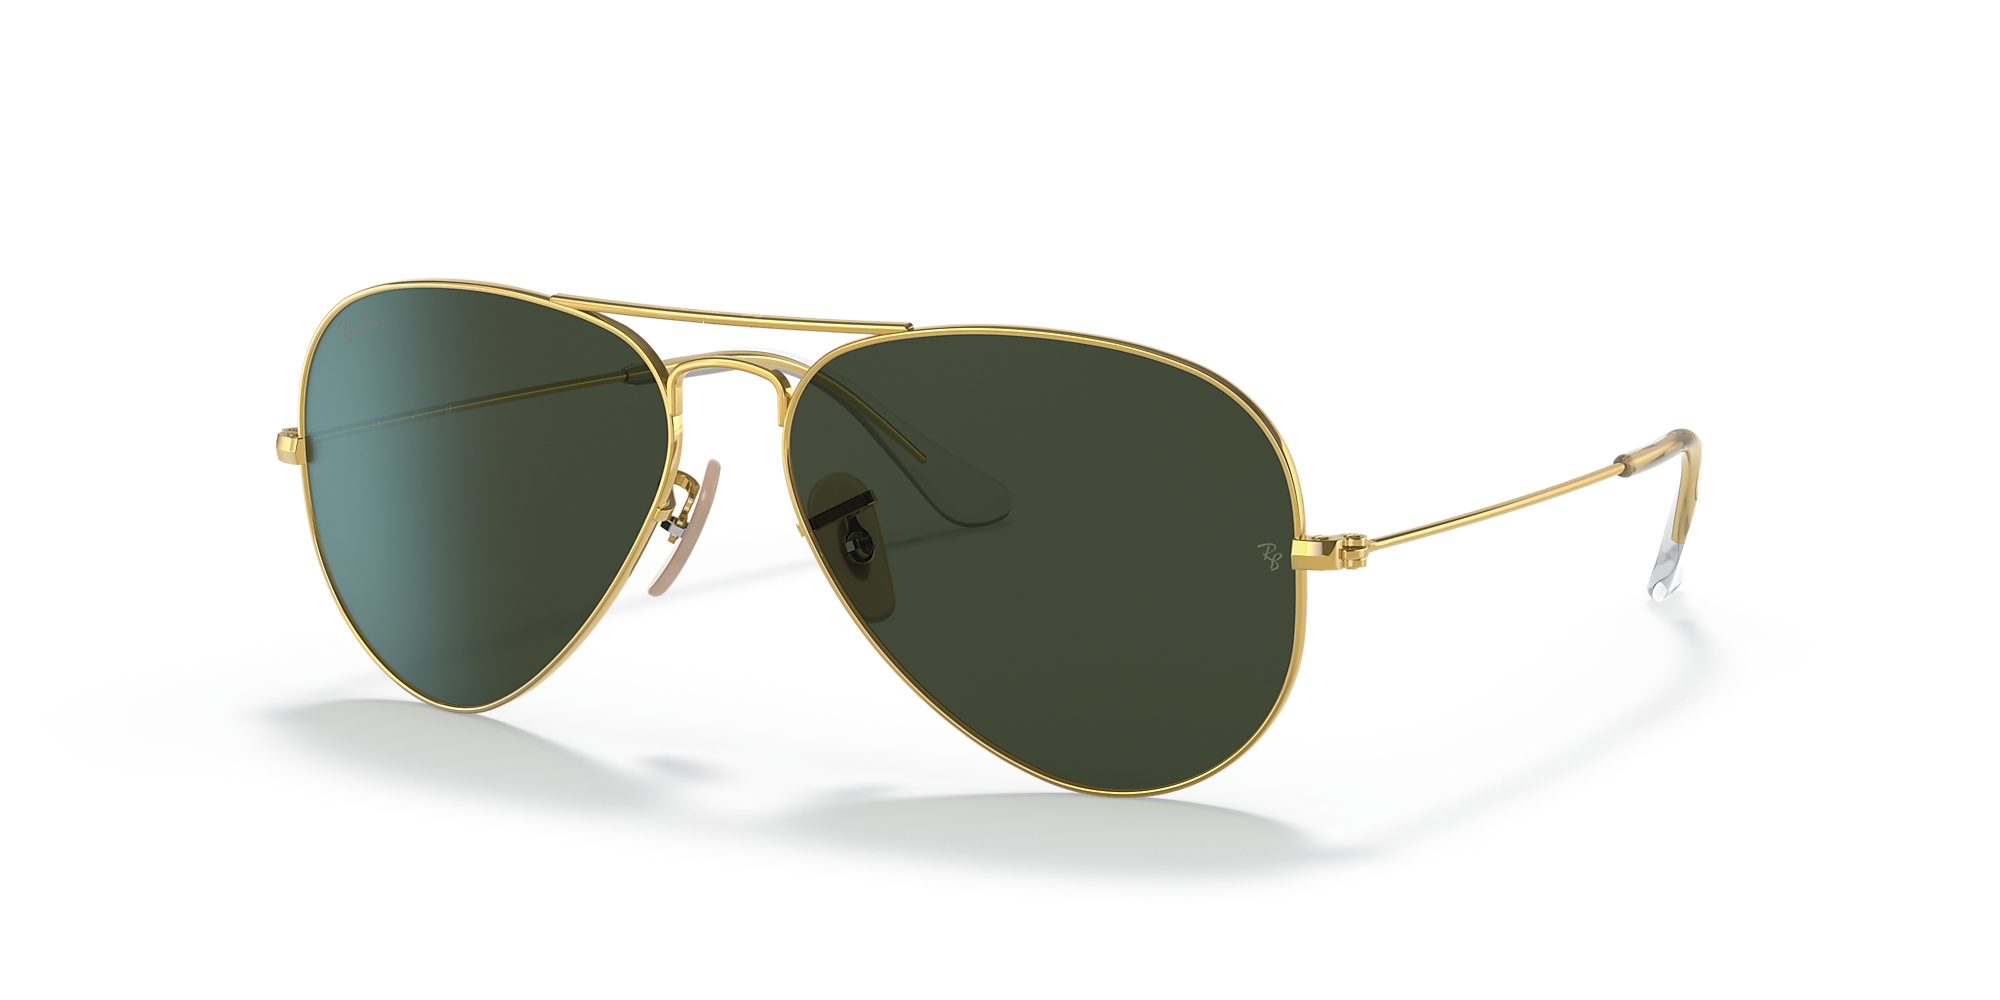 Ray Ban Rb3025 Aviator Aviation Collection 58 Green Classic G 15 And Gold Sunglasses Sunglass